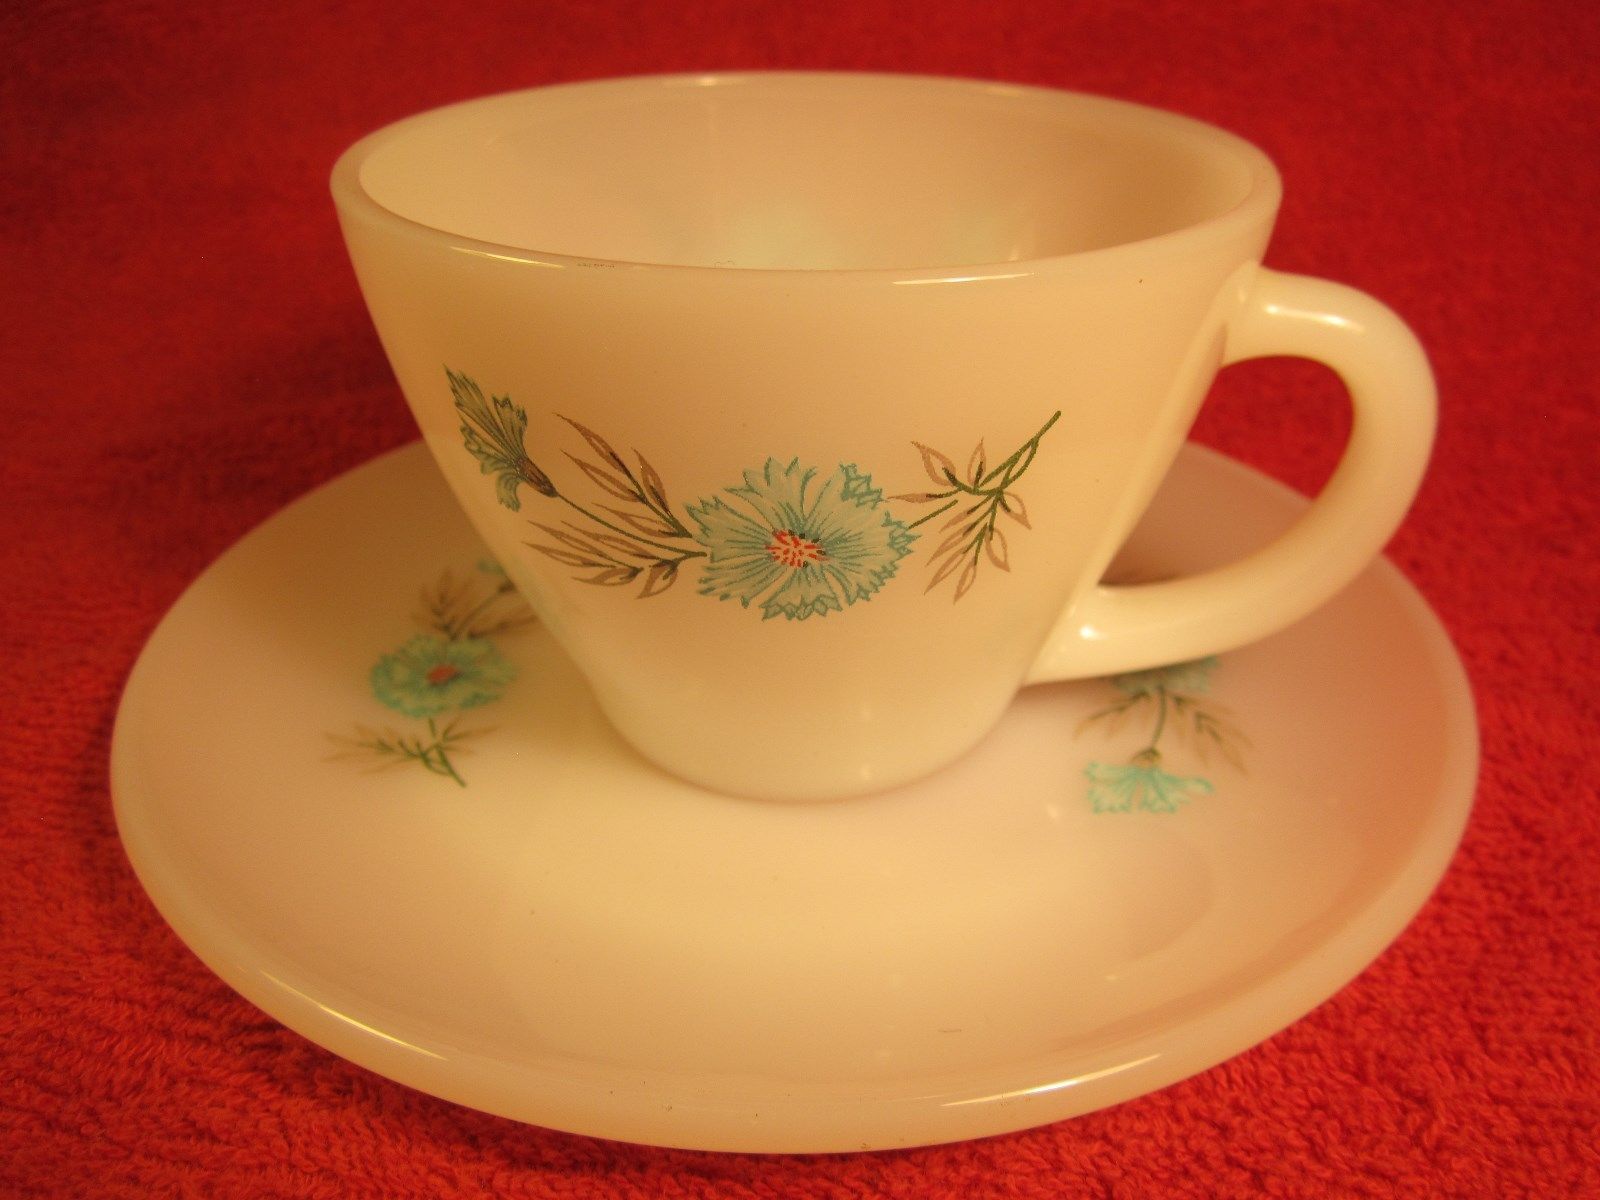 Primary image for FIRE KING Coffee Cup & Saucer FLORAL Blue Flowers PREMIUM 8 oz [Z183]